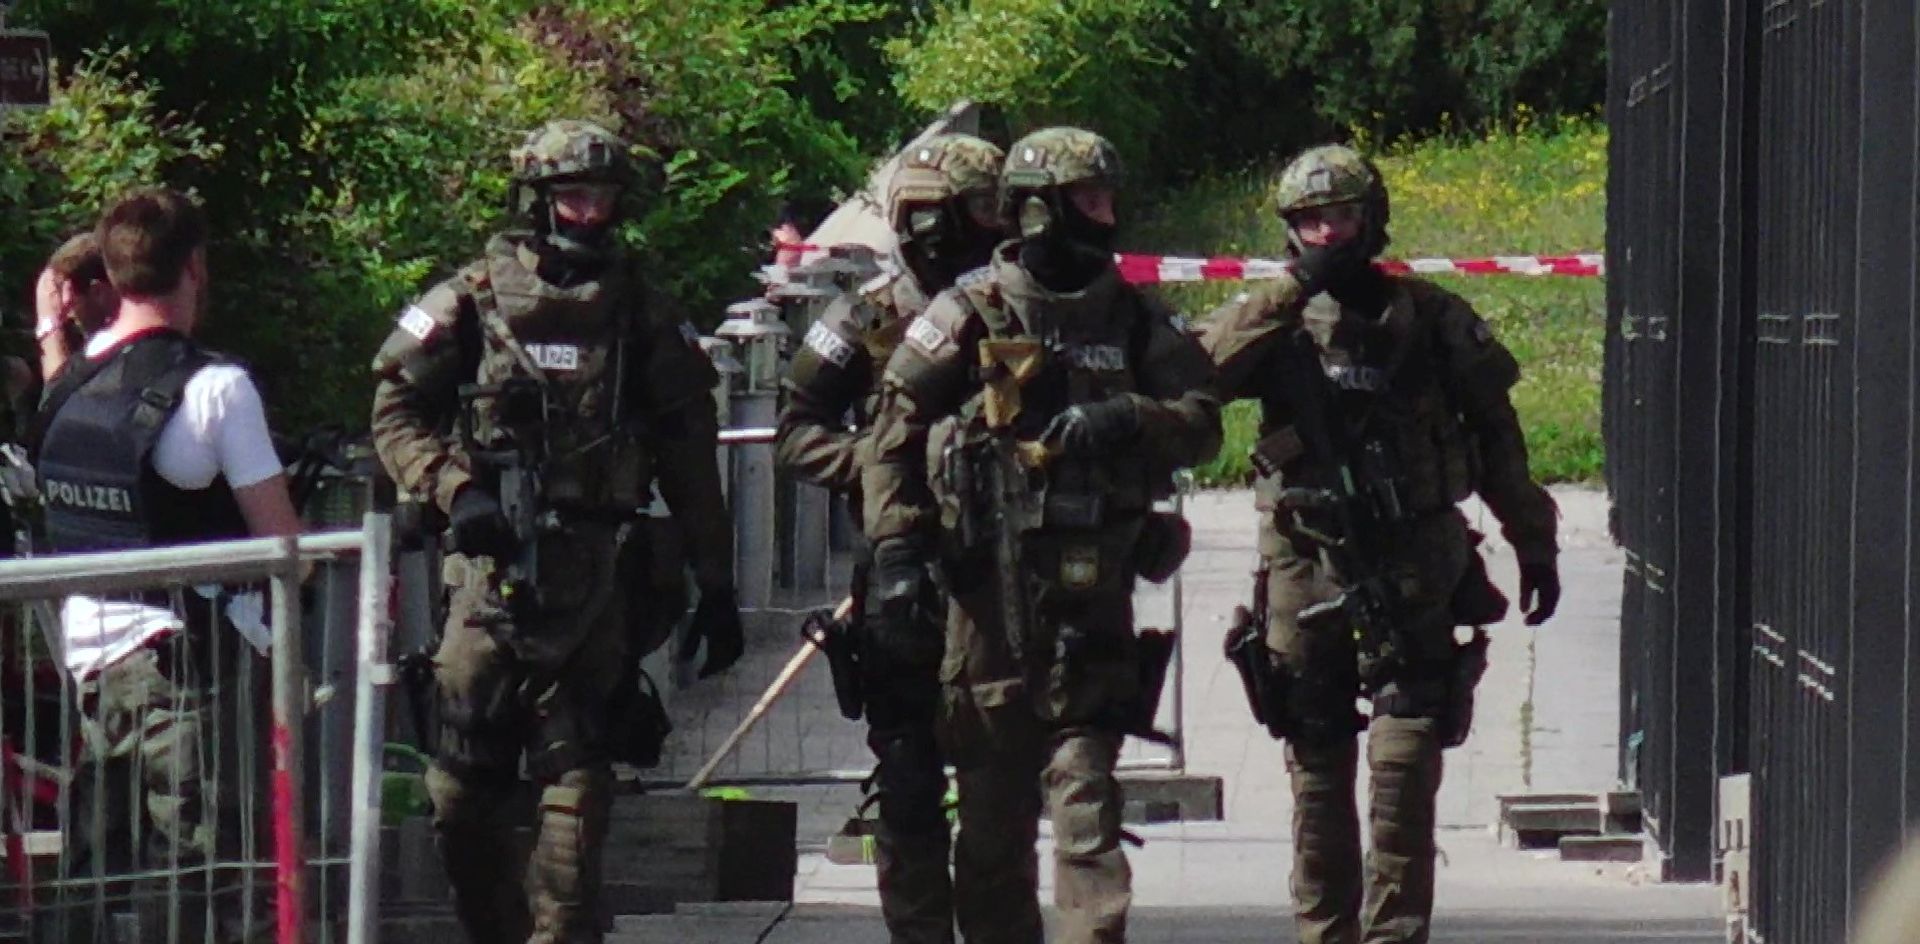 epa06025521 Armed German policemen secure the scene of a shooting at the Unterfoehring subway station in Munich, Germany 13 June 2017. According to reports, during a morning police check at the station a suspect took a police officer's pistol and then shot her, also injuring others at the scene. According to police information, it is probably not a terrorist attack.  EPA/MARC MUELLER